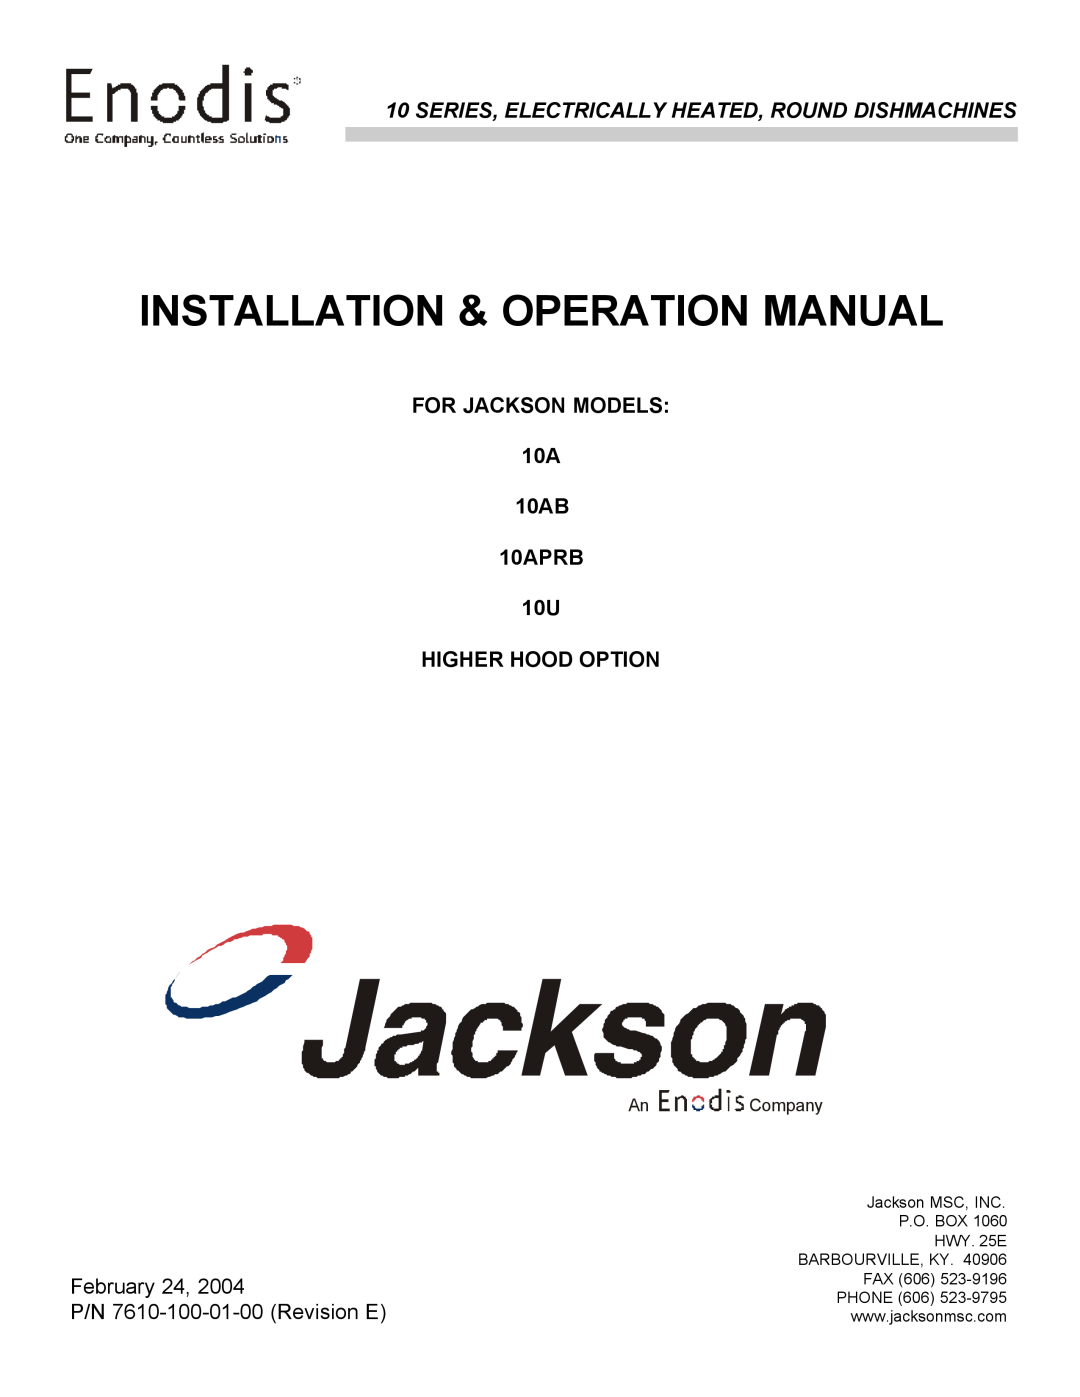 Jackson 10APRB, 10AB, 10U technical manual Technical Manual, An Company, Series, Electrically Heated, Round Dishmachines 